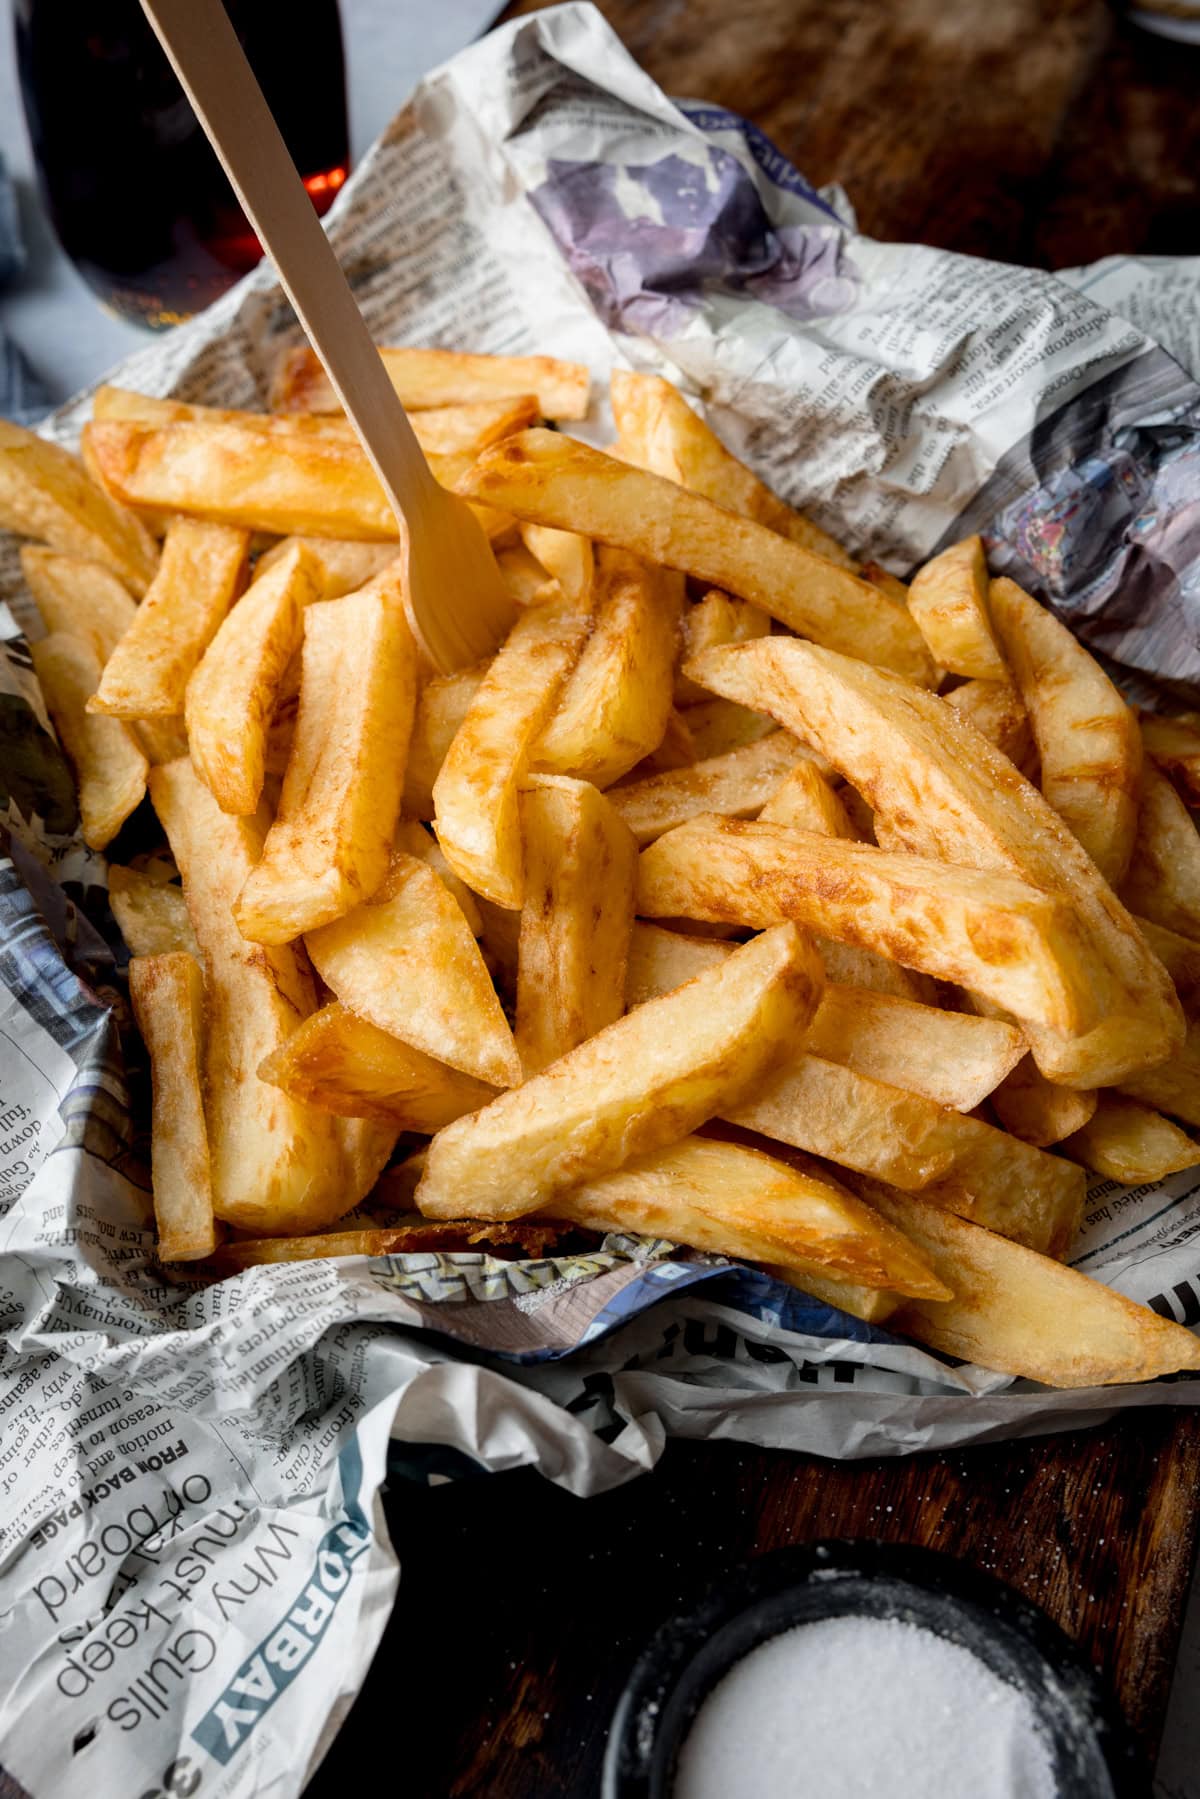 A tall, image of Chip Shop-Style Chips on top of some crumpled newspaper, with a small wooden fork sticking out of the chips. The chips and newspaper are placed on a wooden surface. In the bottom middle of the background, there is a small black dish of salt. And, in the top left of the background, you can slightly see a brown vinegar bottle.